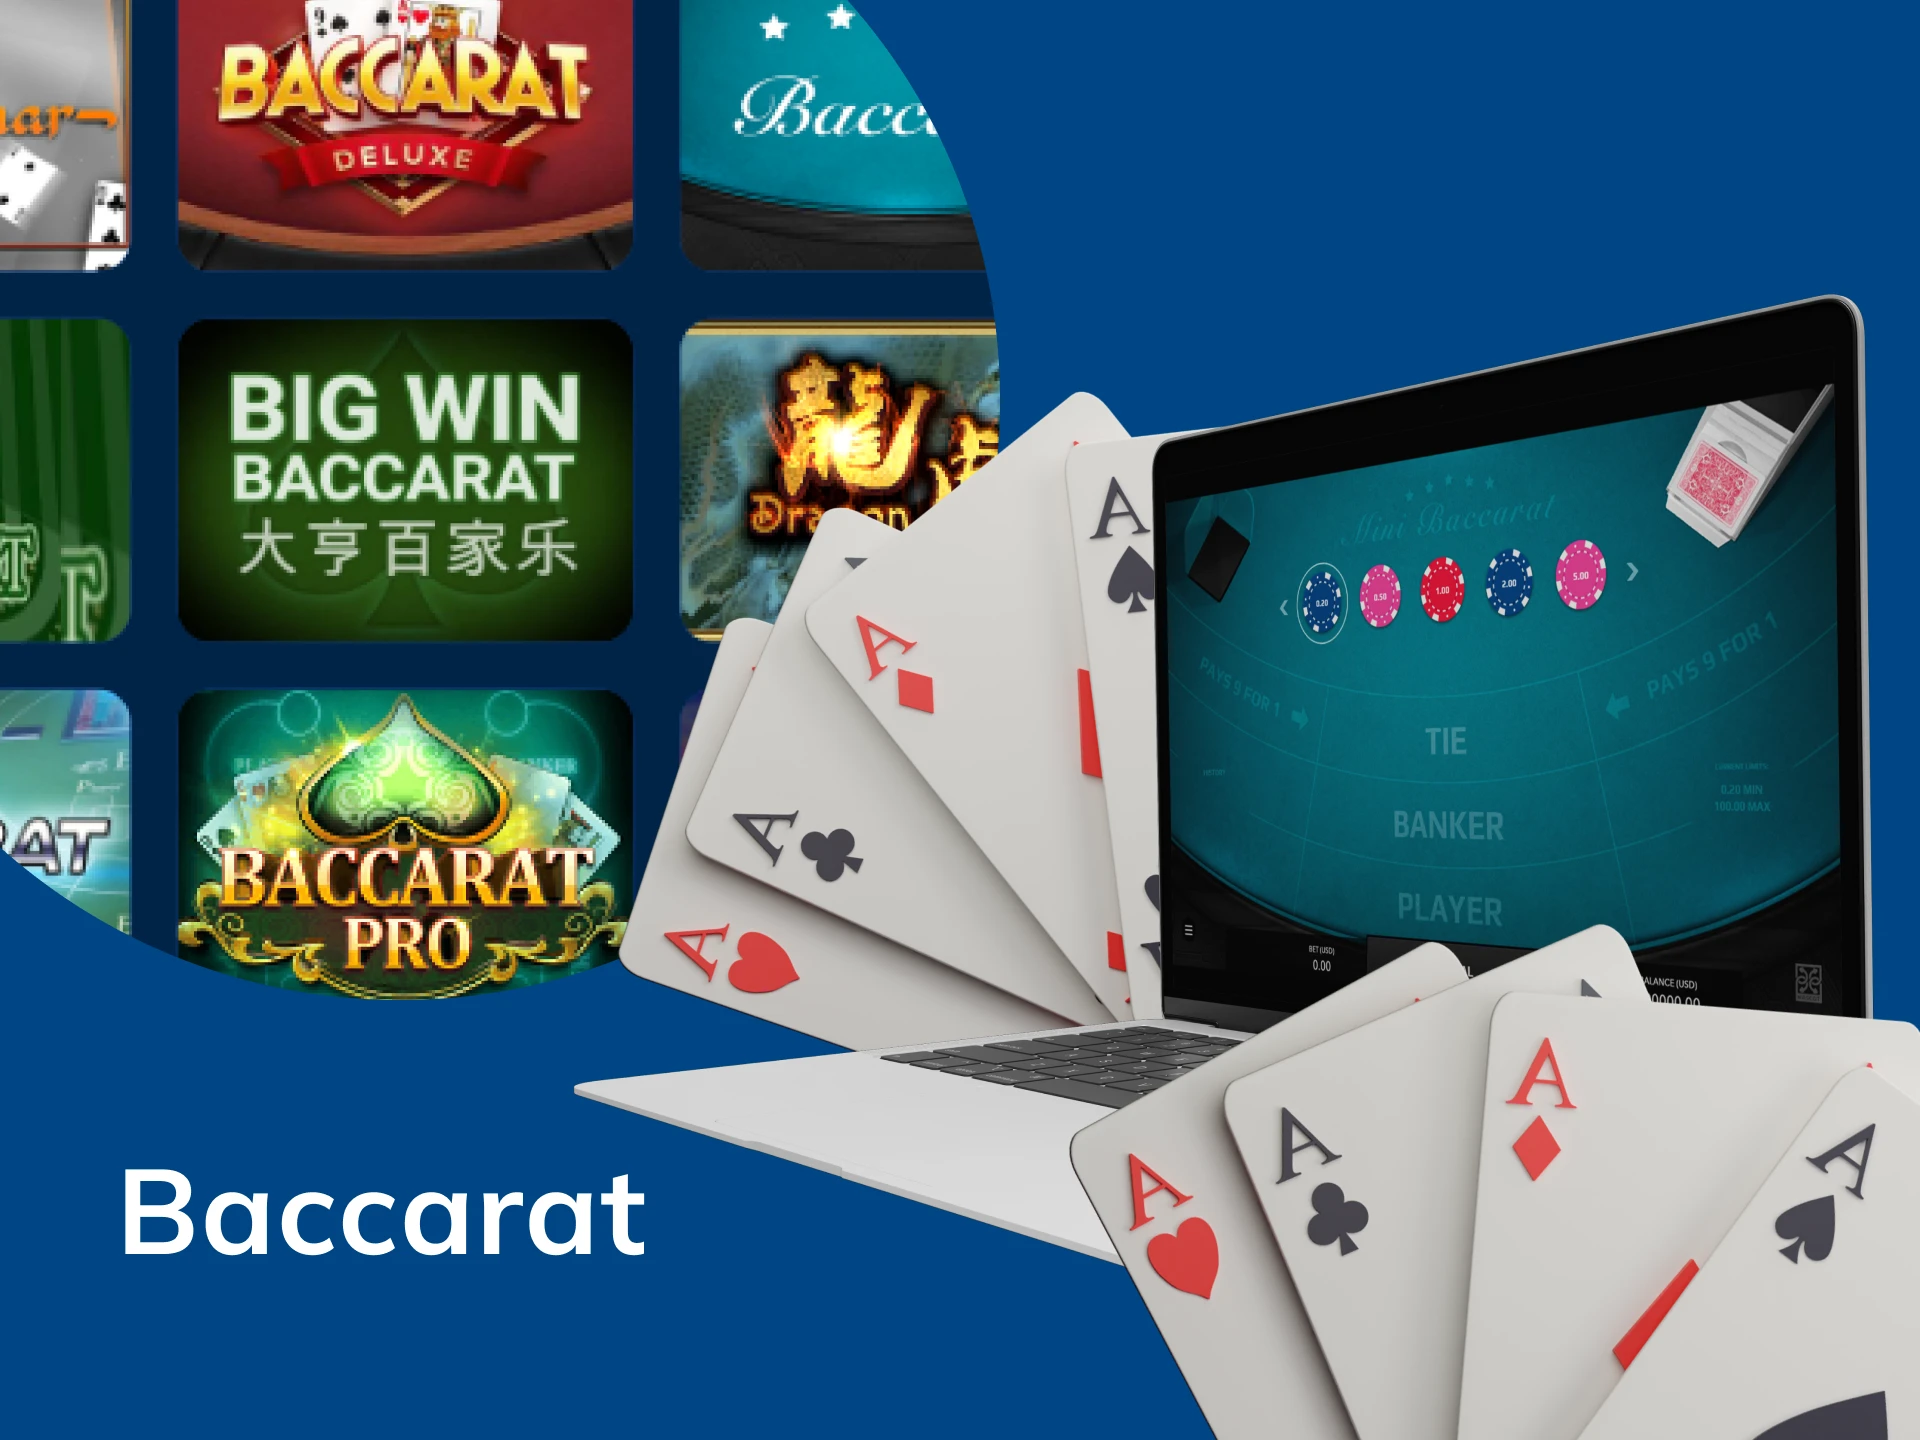 Baccarat is the best choice for players with modest and large bets.